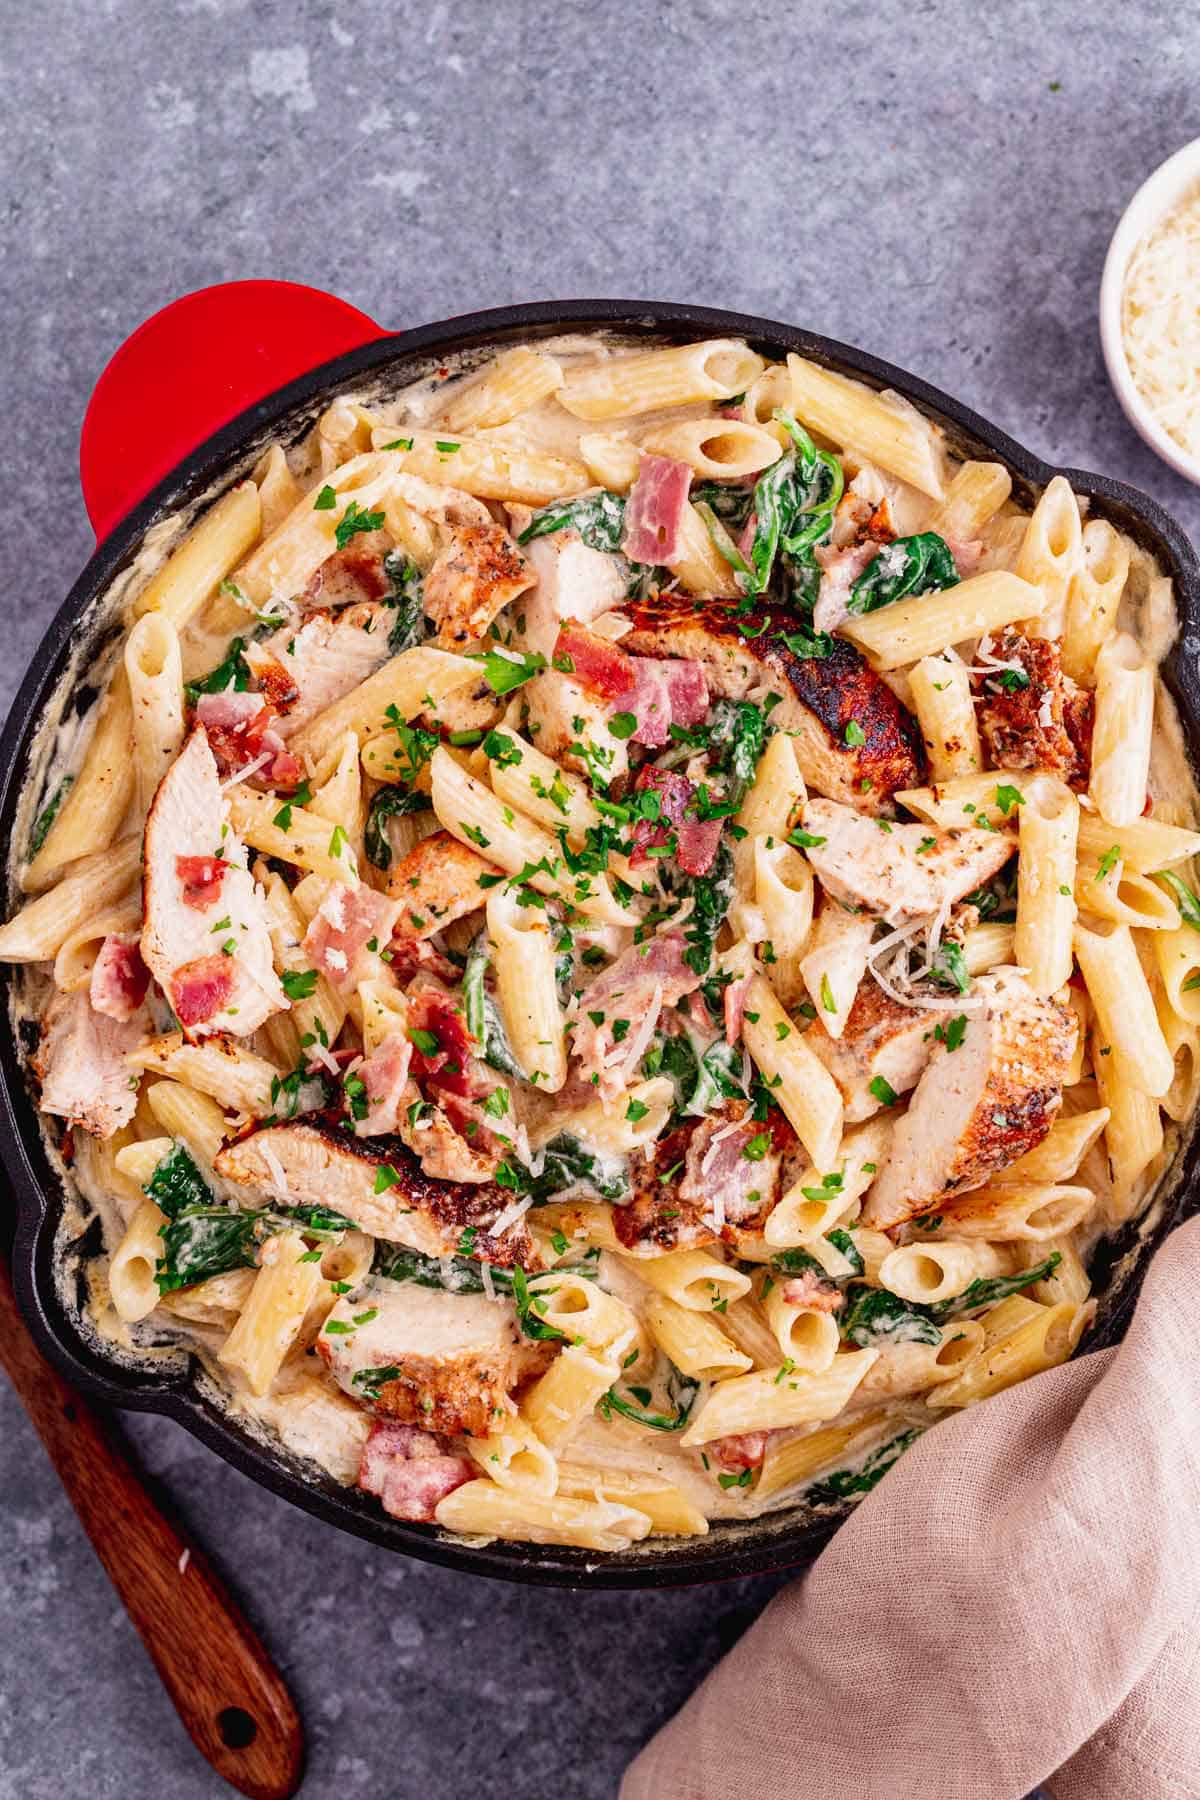 This Creamy Chicken Bacon And Spinach Pasta is one of our all-time favorite dinner recipes.  Tender juicy chicken over pasta in a rich creamy sauce with spinach and bacon. An excellent easy weeknight or weekend dinner recipe for the whole family. Yum! - The Yummy Bowl